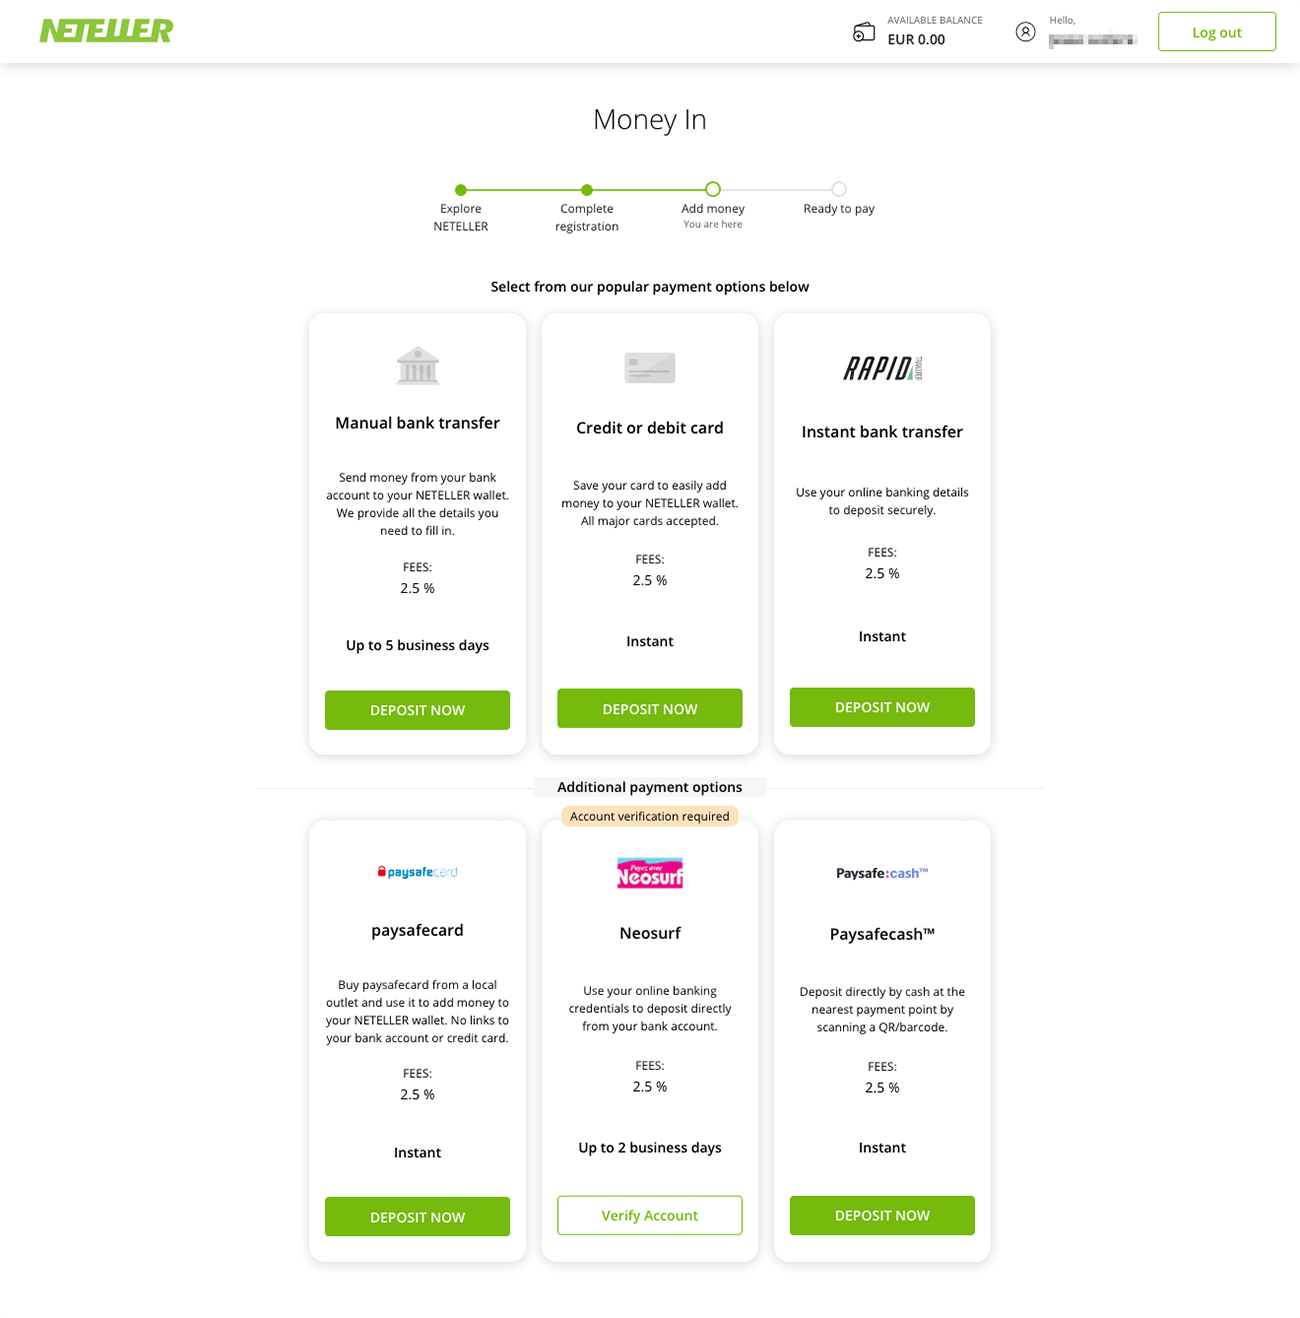 What crypto services does NETELLER offer?